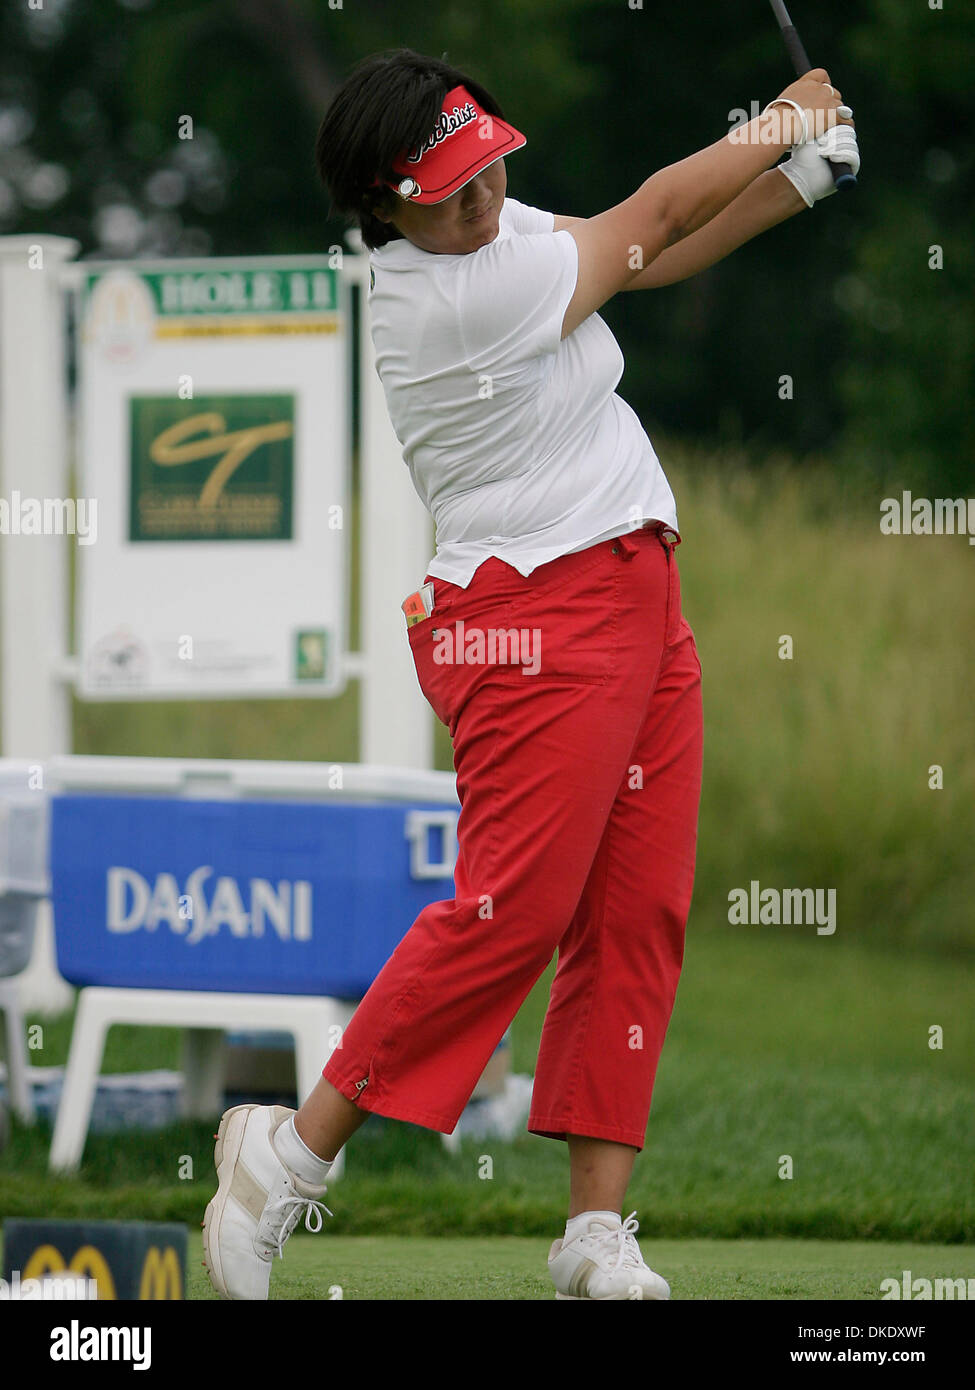 Jun 10, 2007 - Havre de Grace, Maryland, USA - Bulle Rock Golf Course:  SIEW-AI LIM ees off on the 11th hole at Bulle Rock golf course in the final round of action in the McDonalds LPGA Championship. Lim finished the day at 1 over par, and the finished the tournament at 4 under par to tie for 18th place (Credit Image: © James Berglie/ZUMA Press) Stock Photo